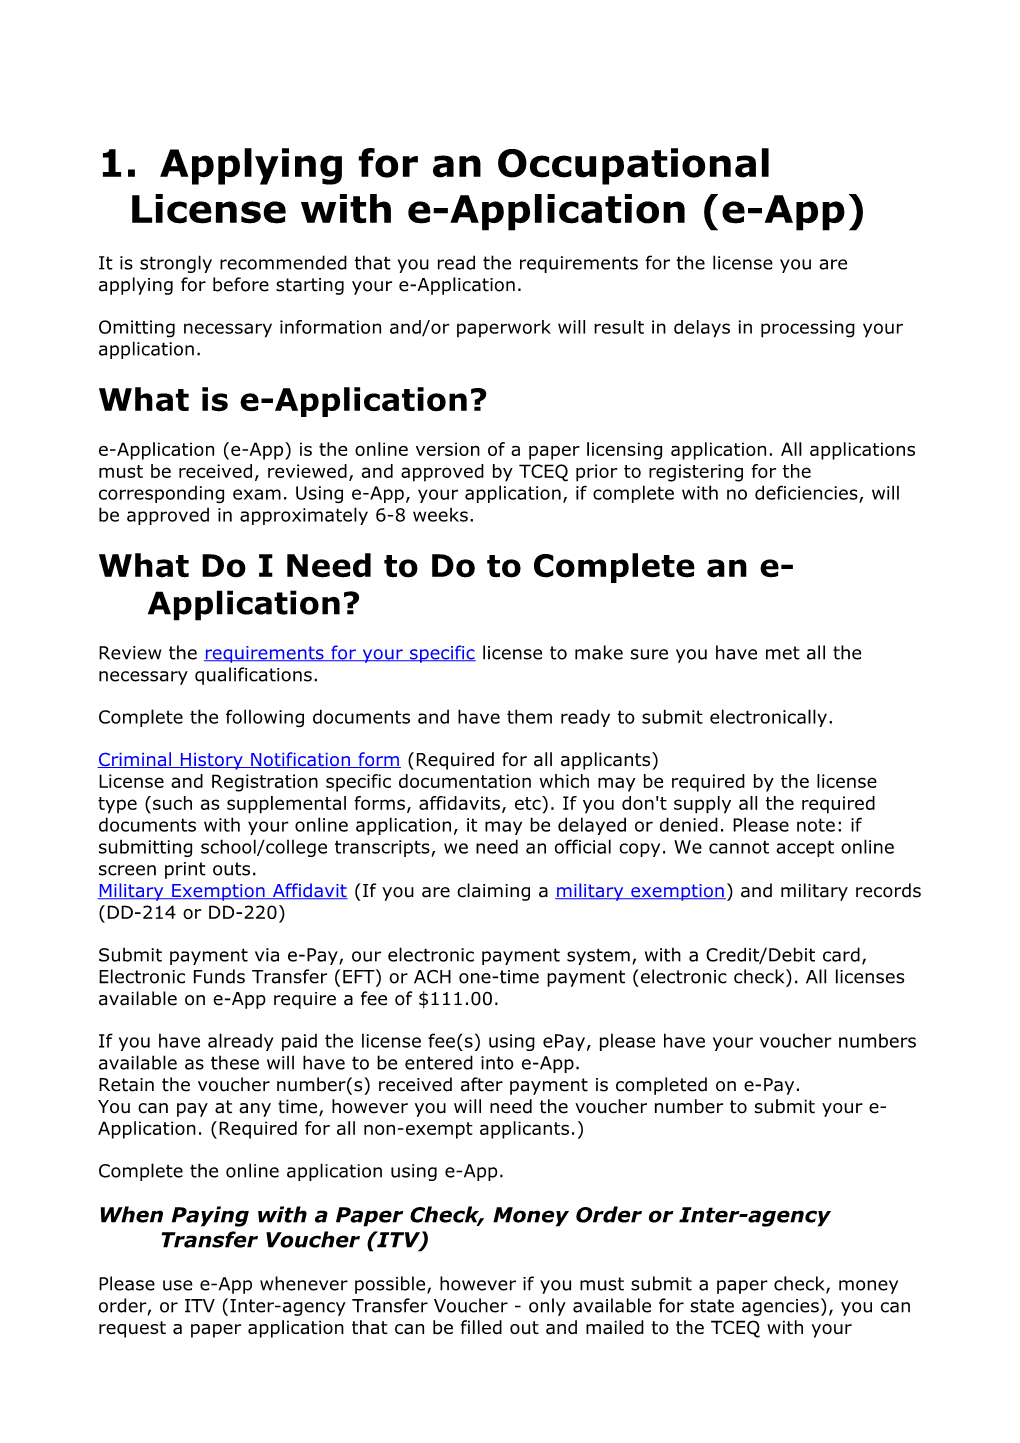 Applying for an Occupational License with E-Application (E-App)